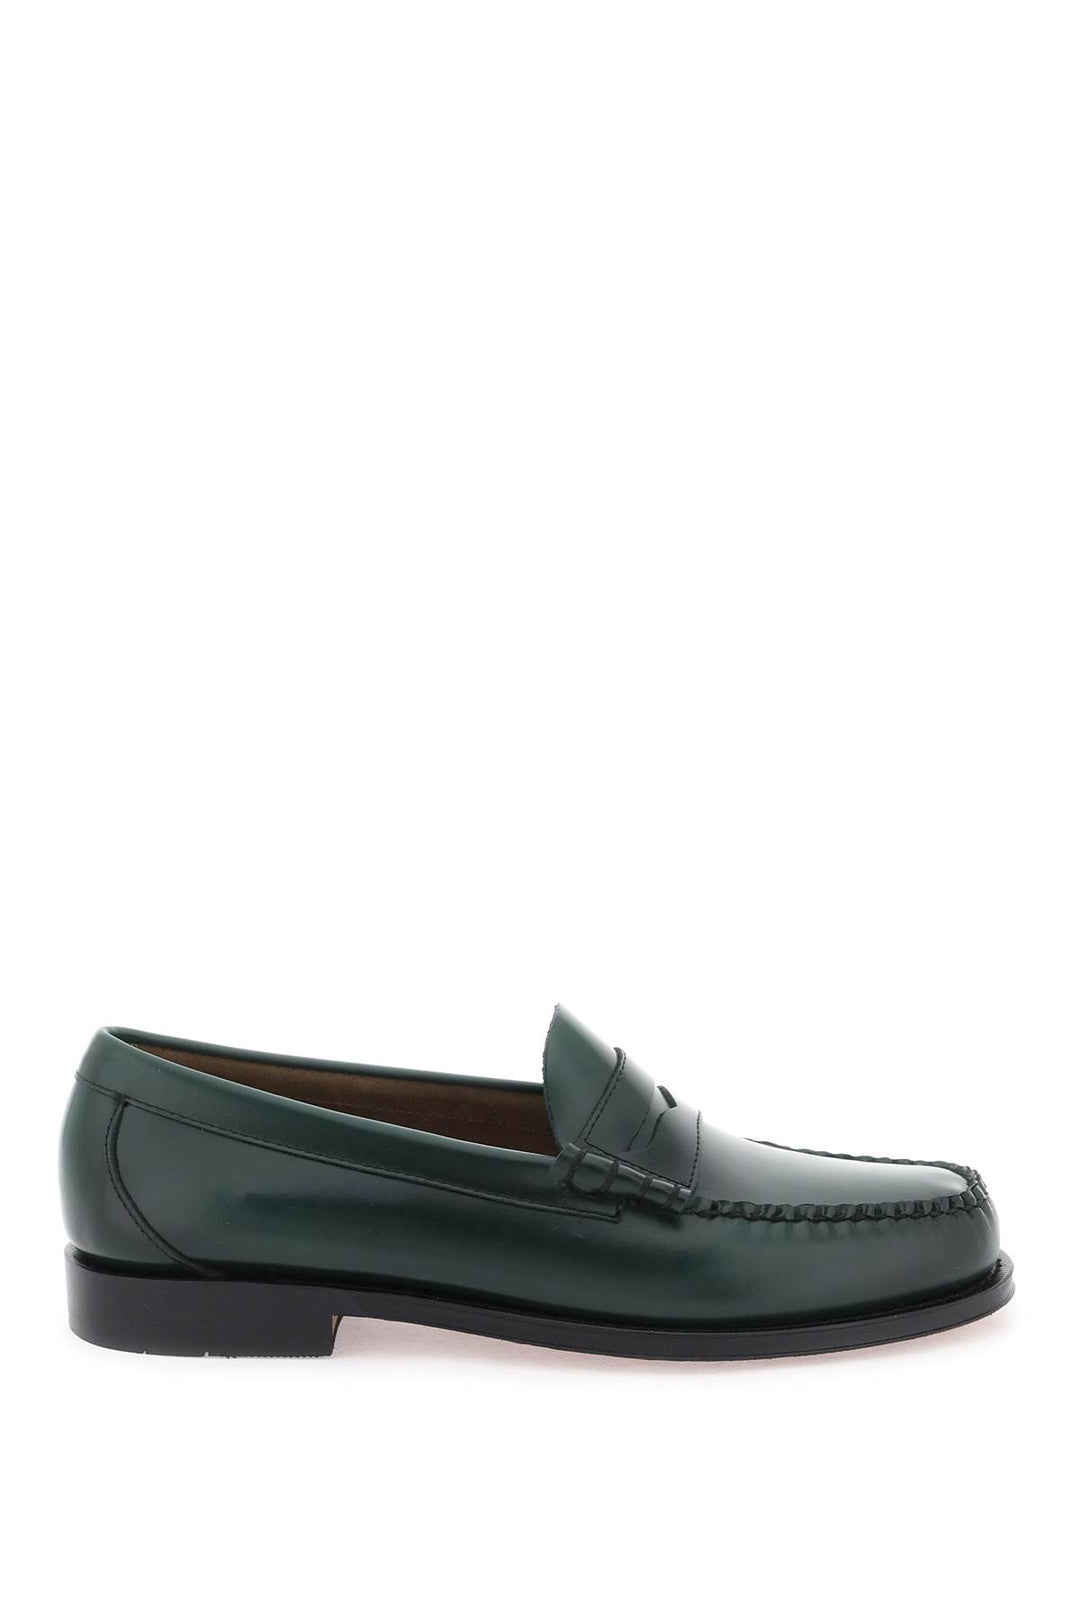 G.H. Bass Weejuns Larson Penny Loafers   Verde